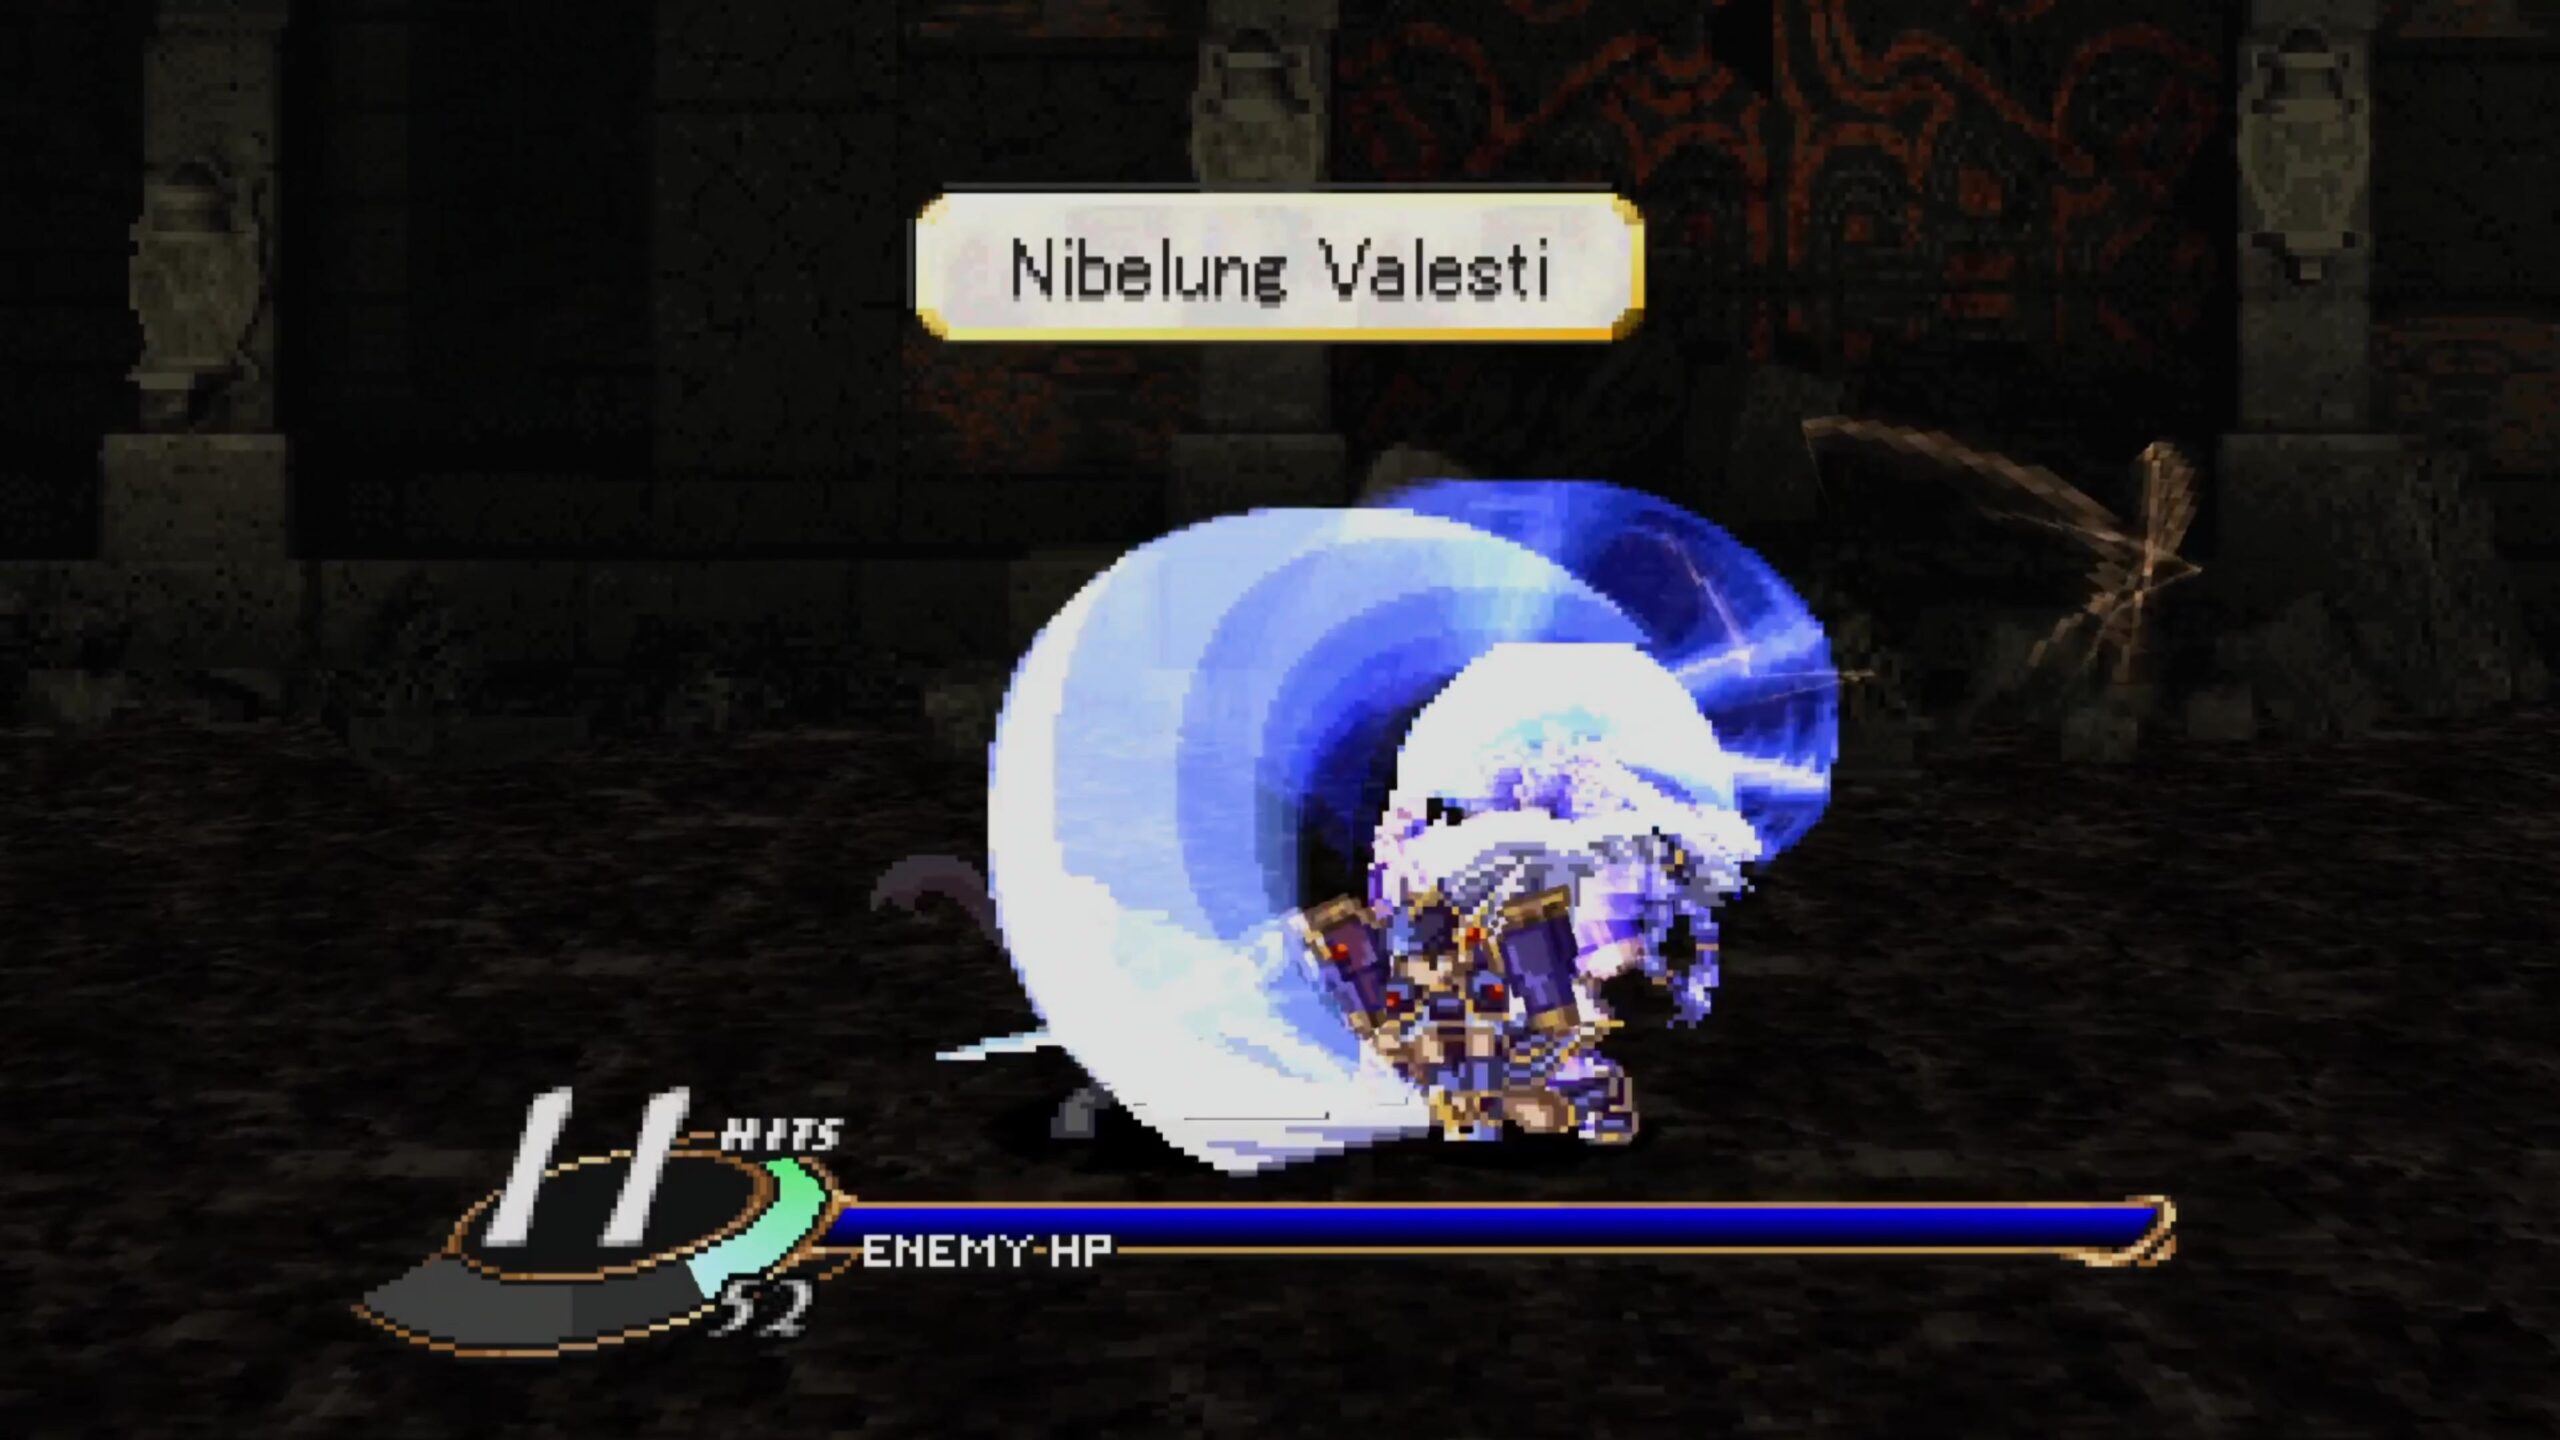 valkyrie profile 2 character list